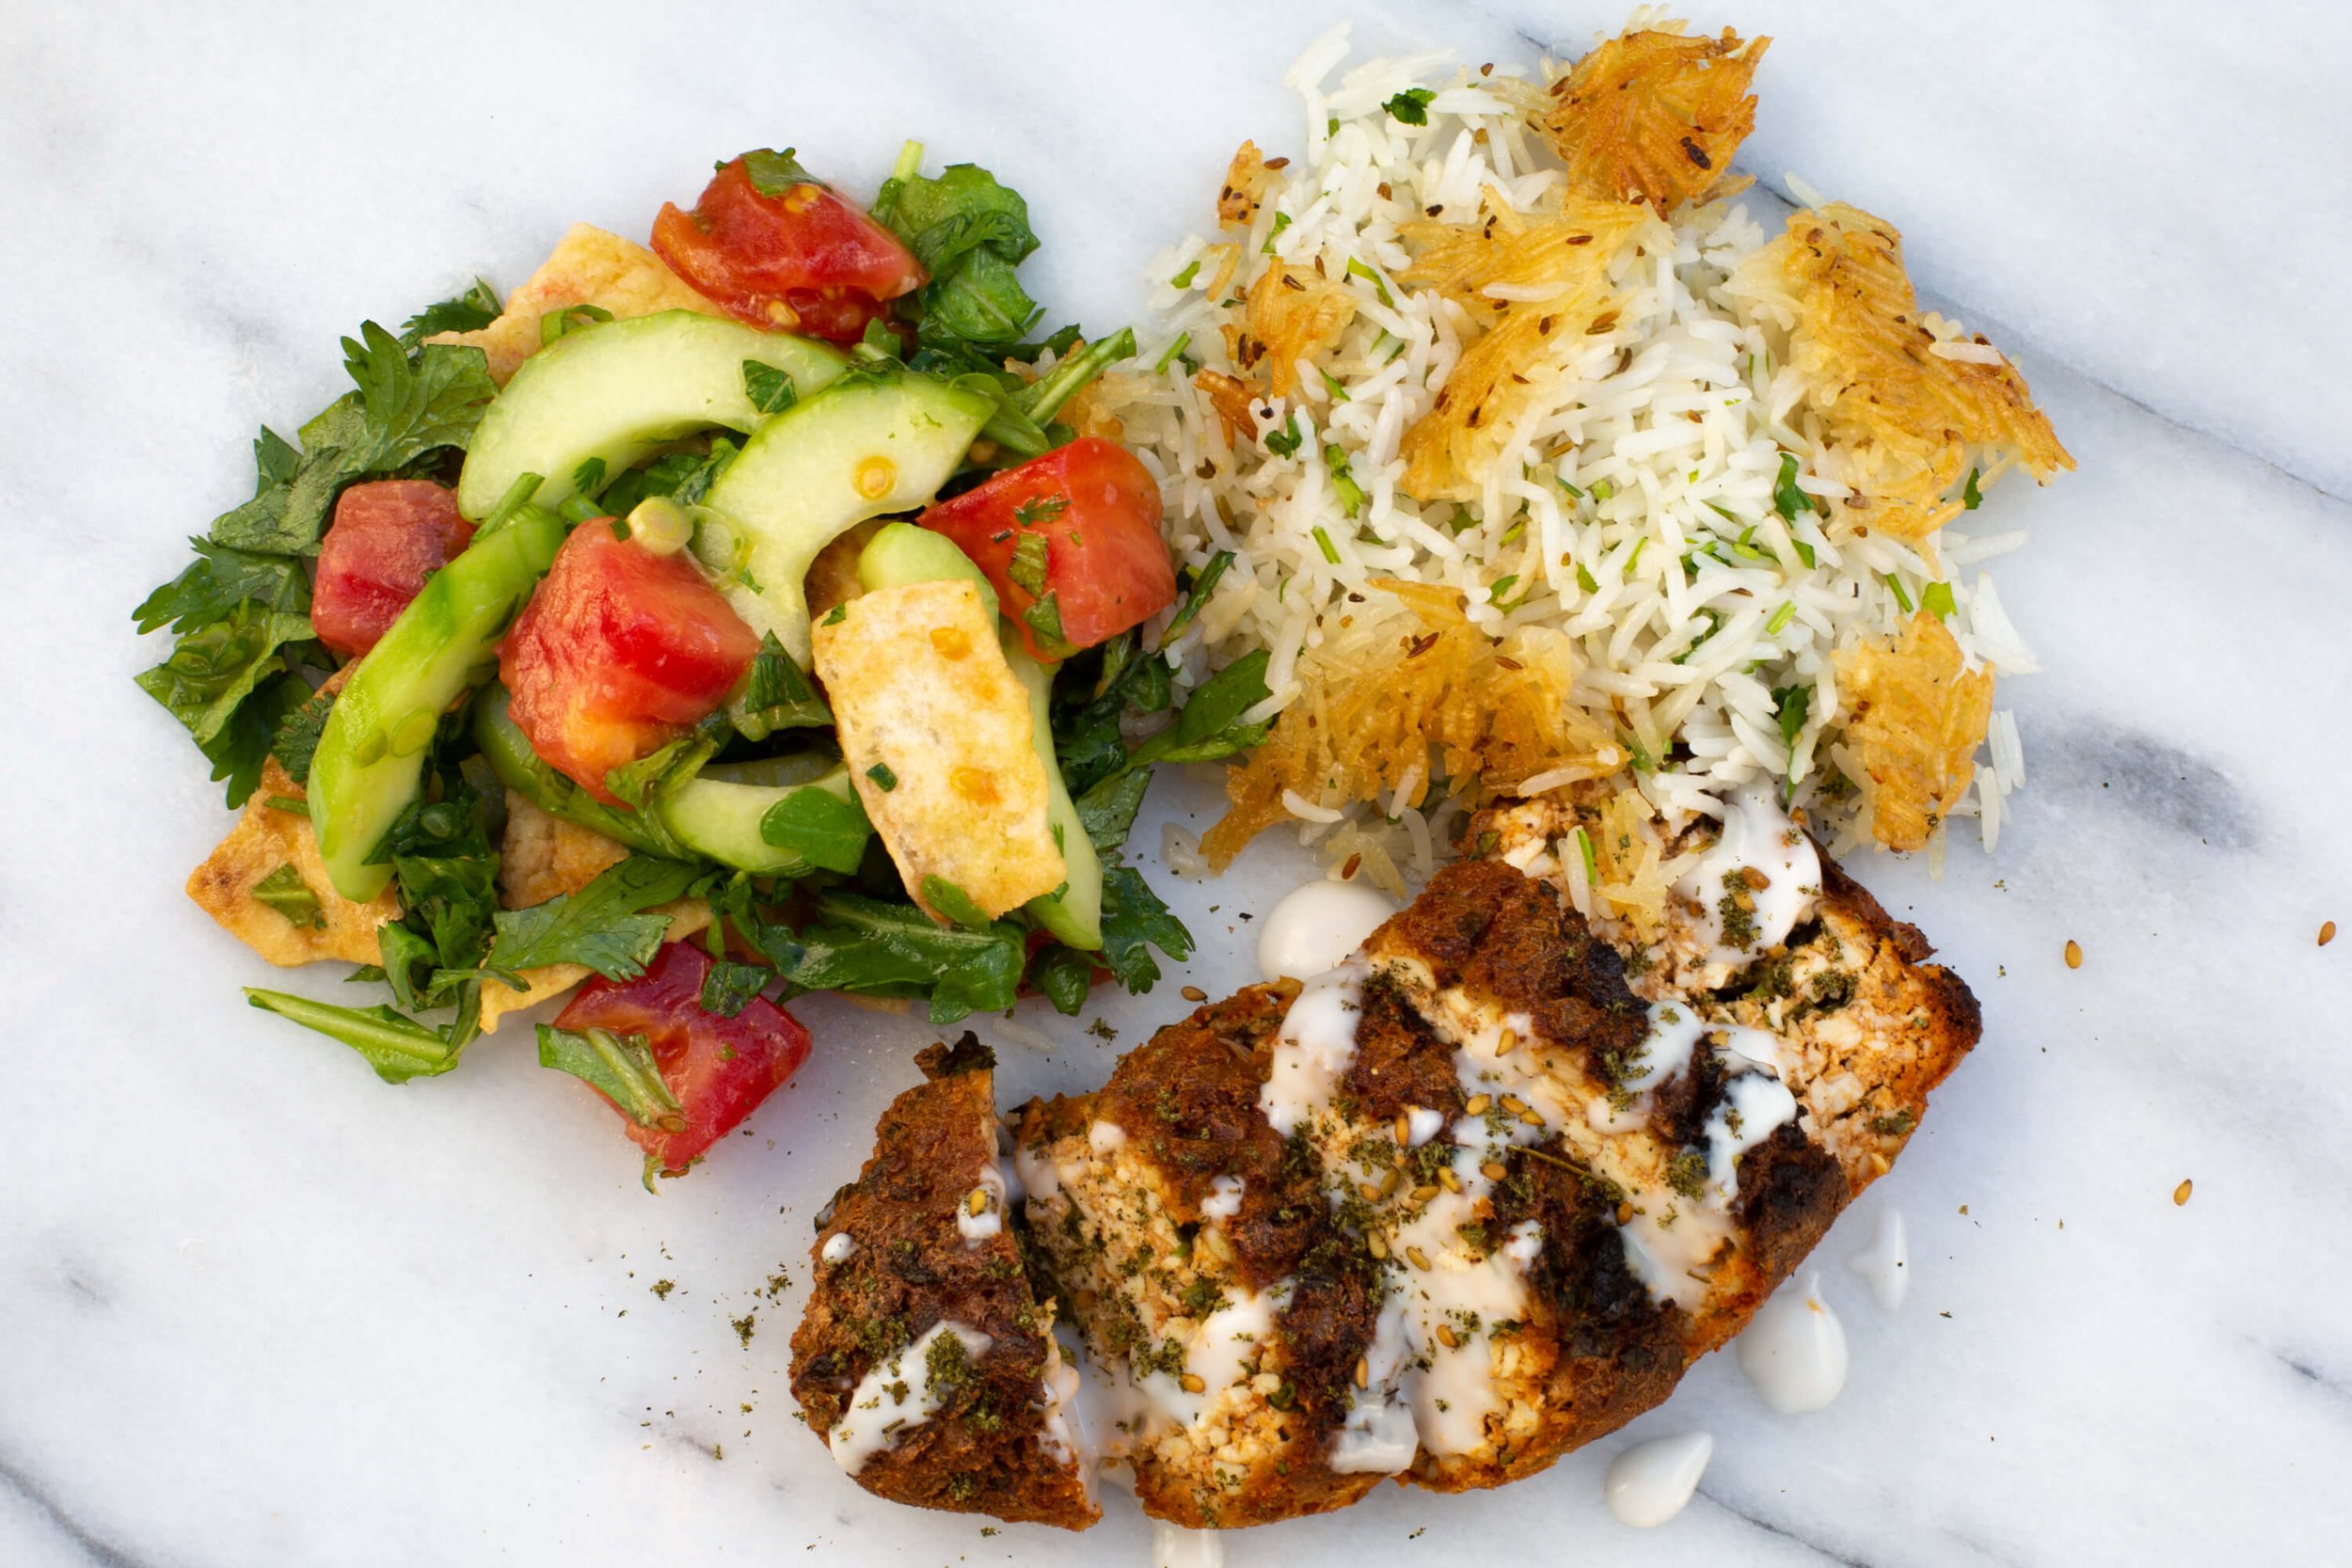 Mediterranean Food You Didn't Know You Were Missing